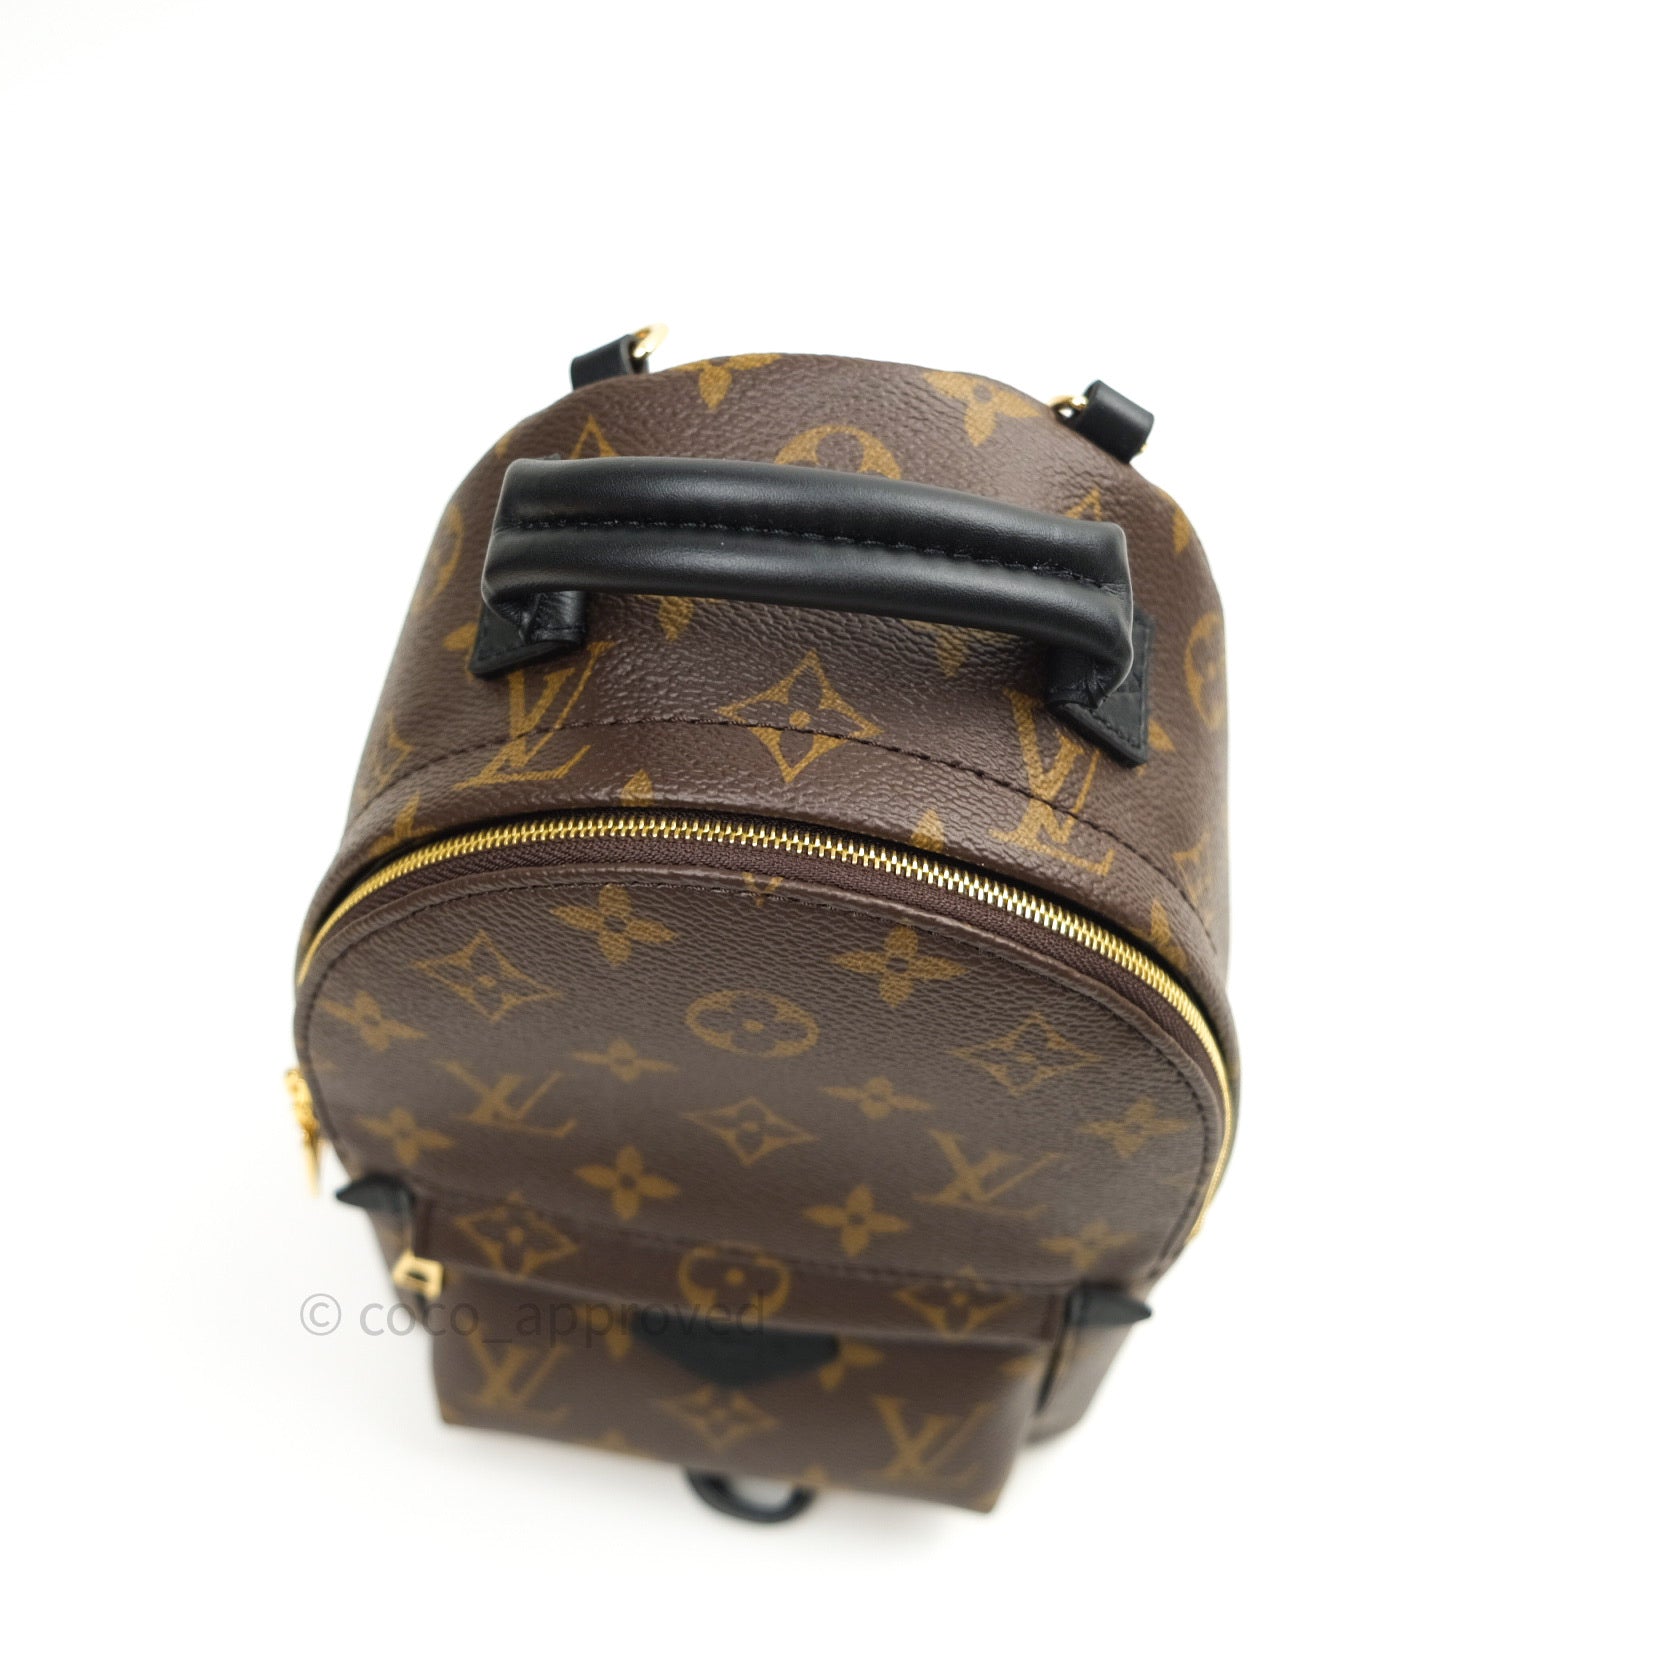 Louis Vuitton Reverse Mini Palm Springs Backpack⁣ – Coco Approved Studio